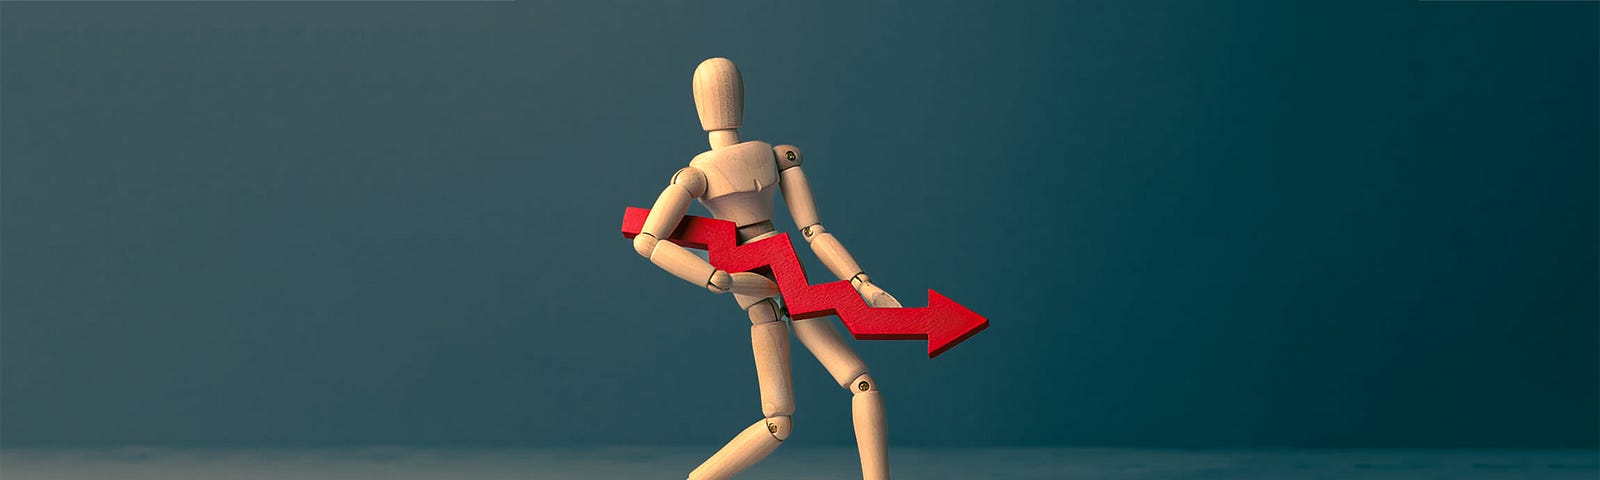 wooden figure holding downward-facing financial graph